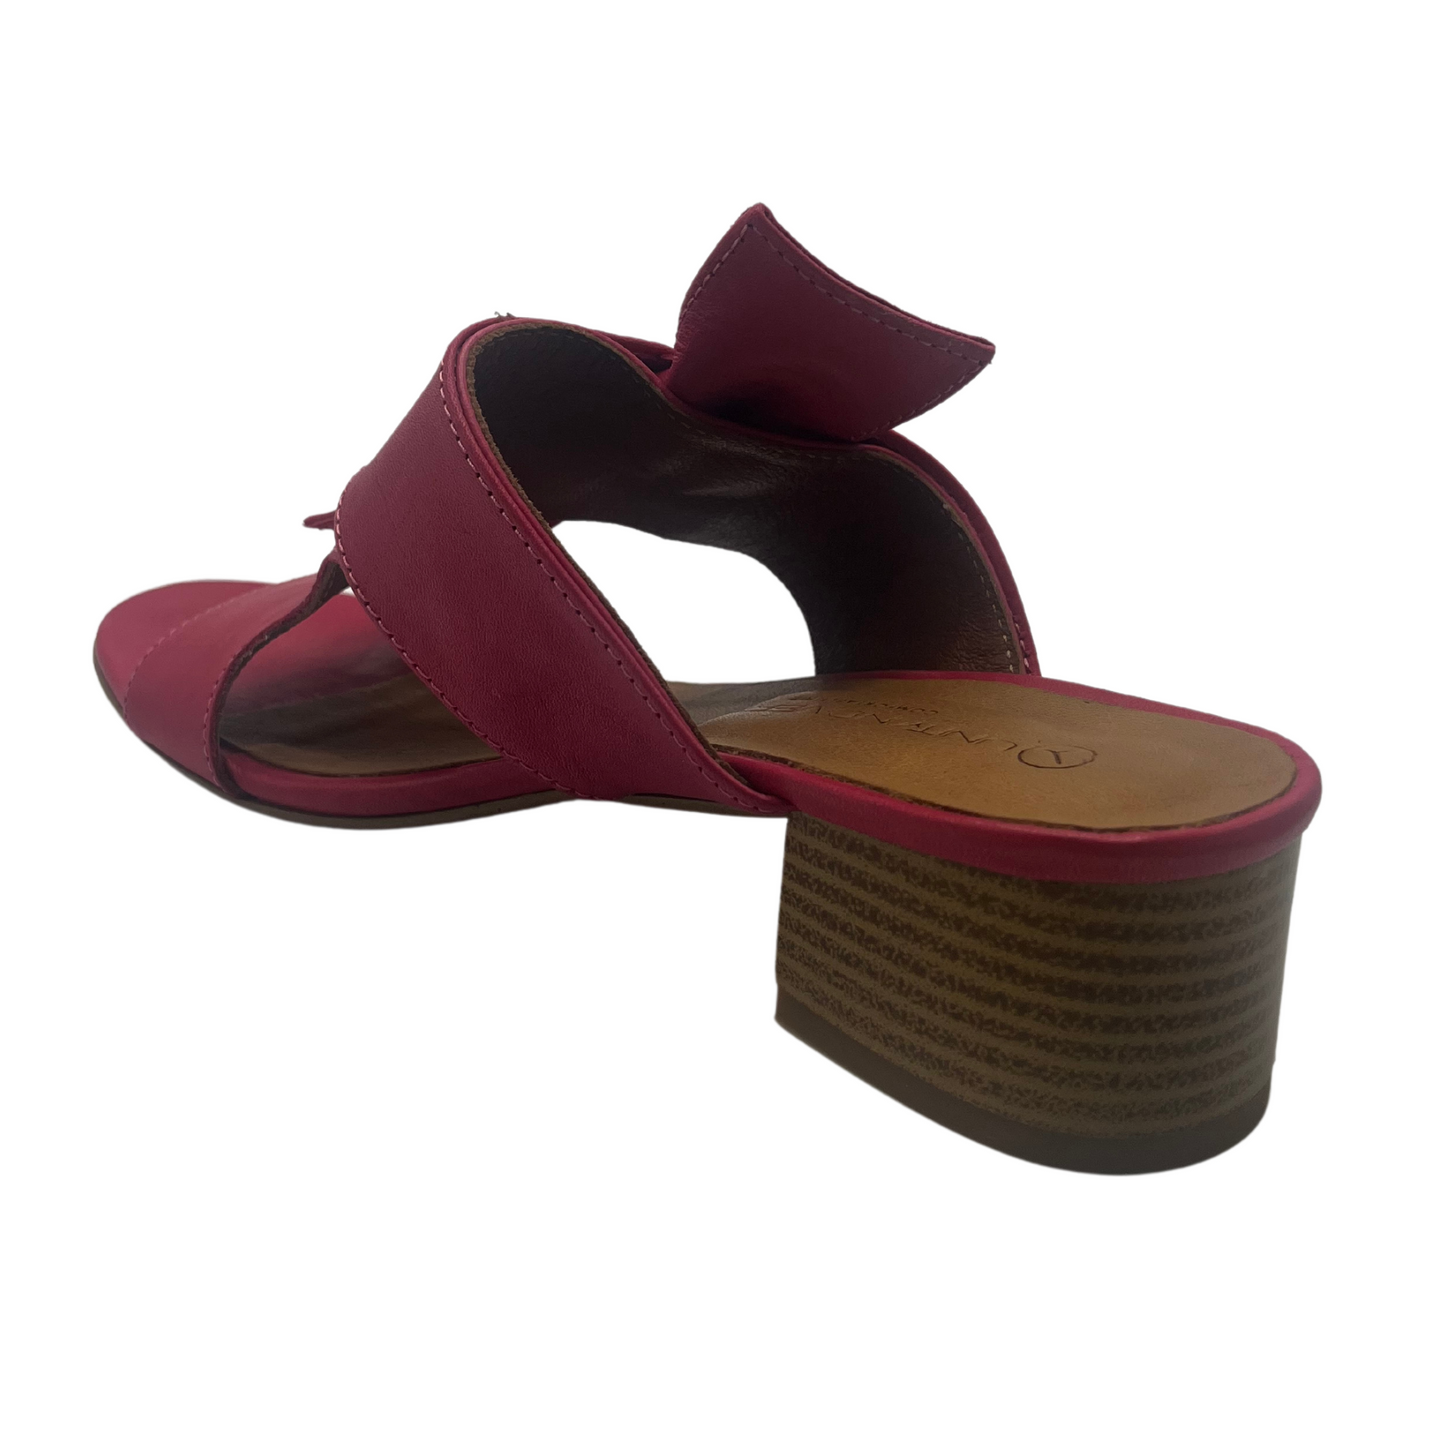 Back view of fuchsia pink leather sandal with block heel, peep toe and knot detail on upper